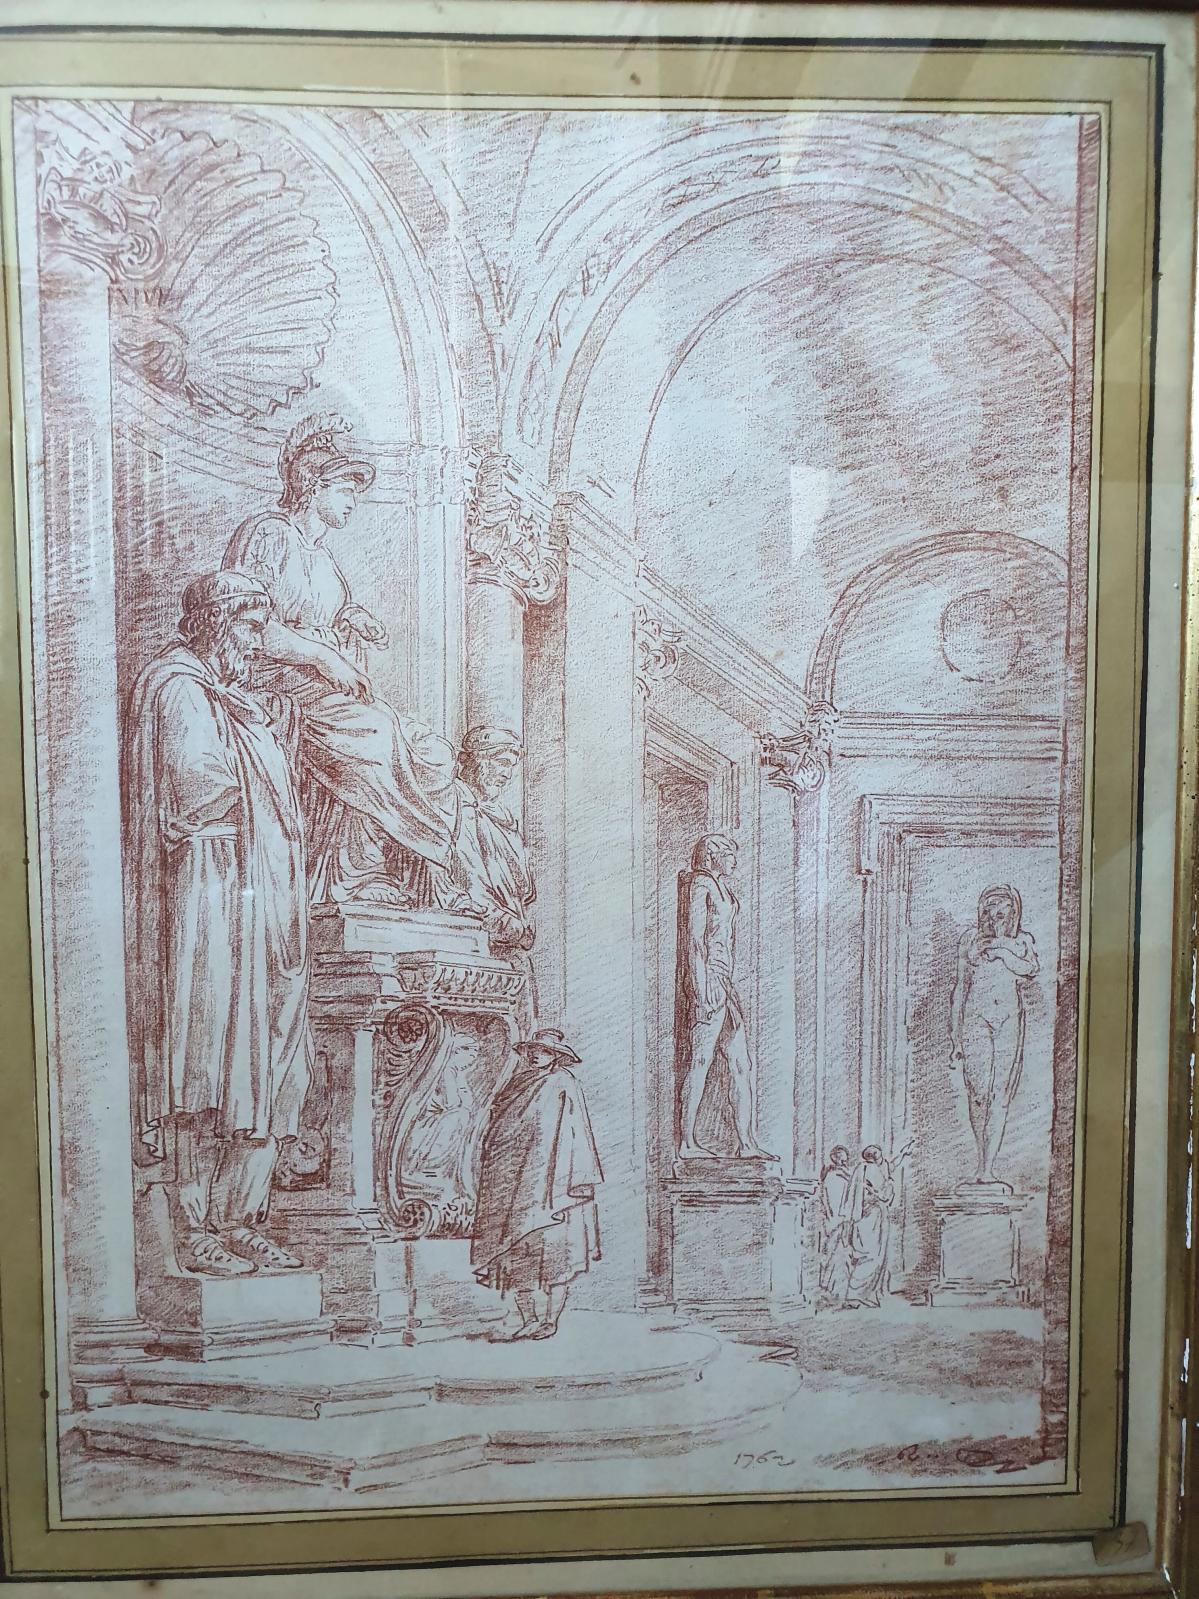 Antiquity Revisited in Red Chalk by Hubert Robert